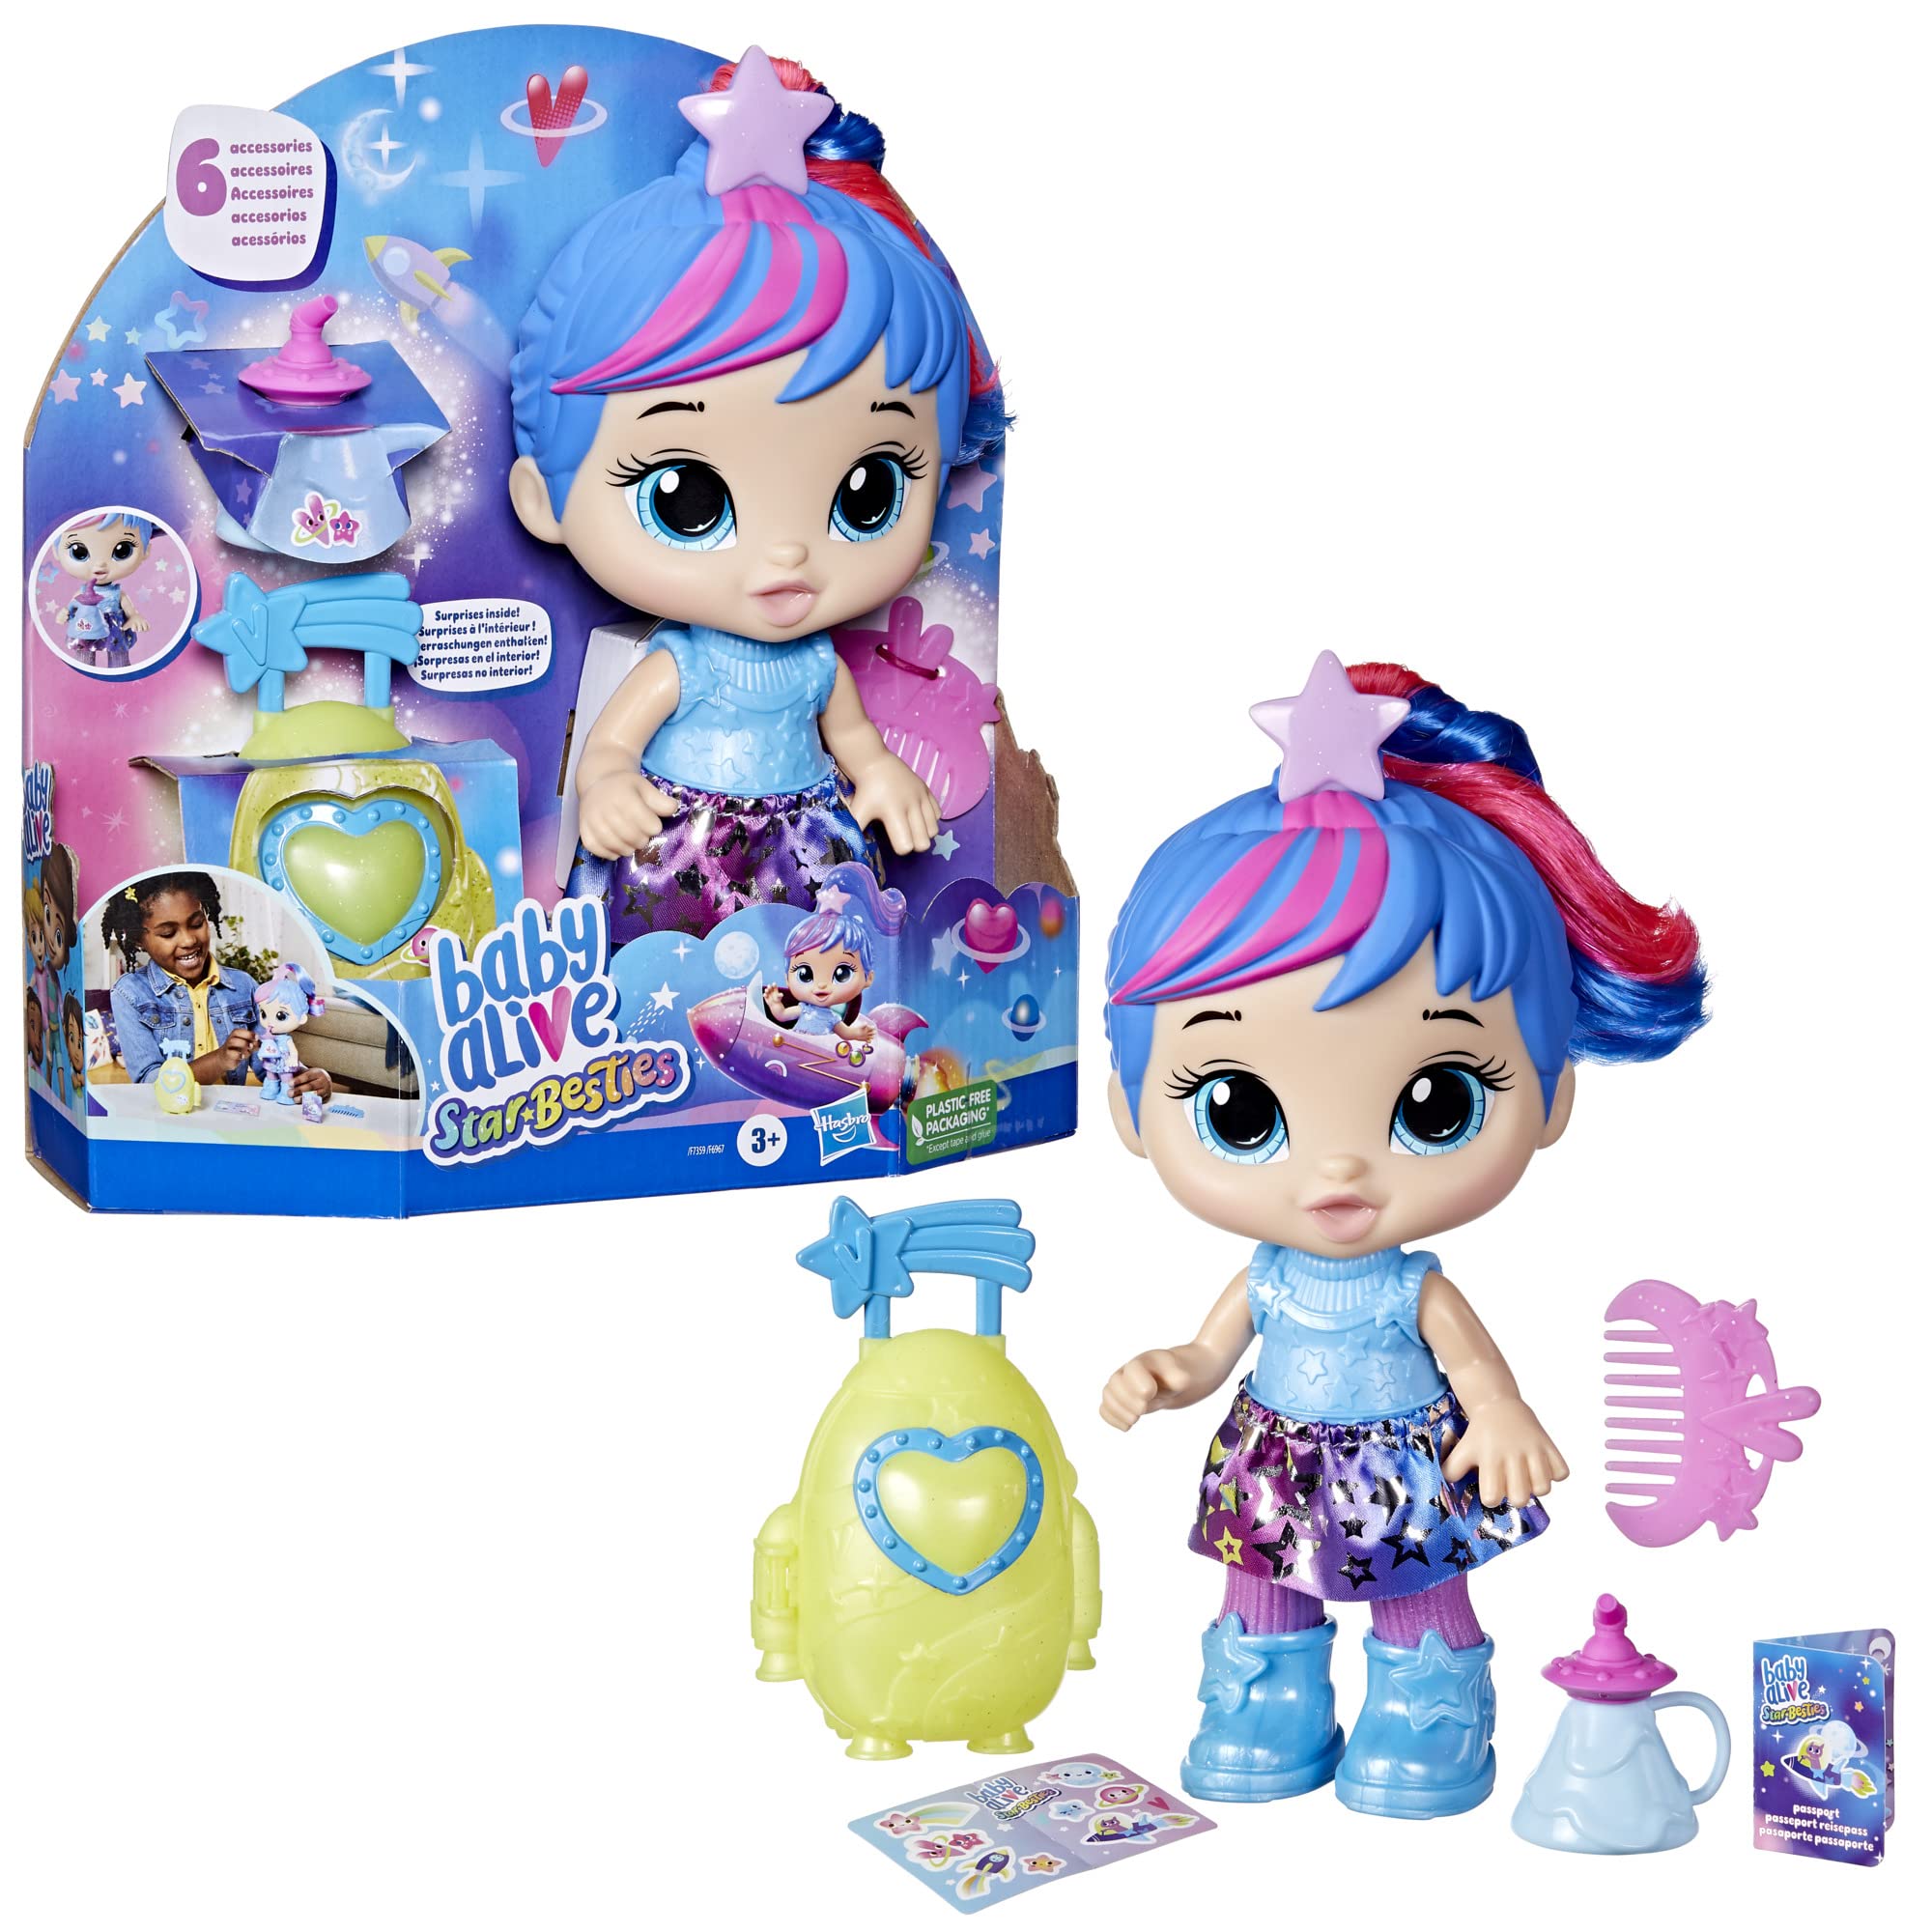 Baby Alive Star Besties Doll, Stellar Skylar, 8-inch Space-Themed Doll for 3 Year Old Girls and Boys and Up, Accessories